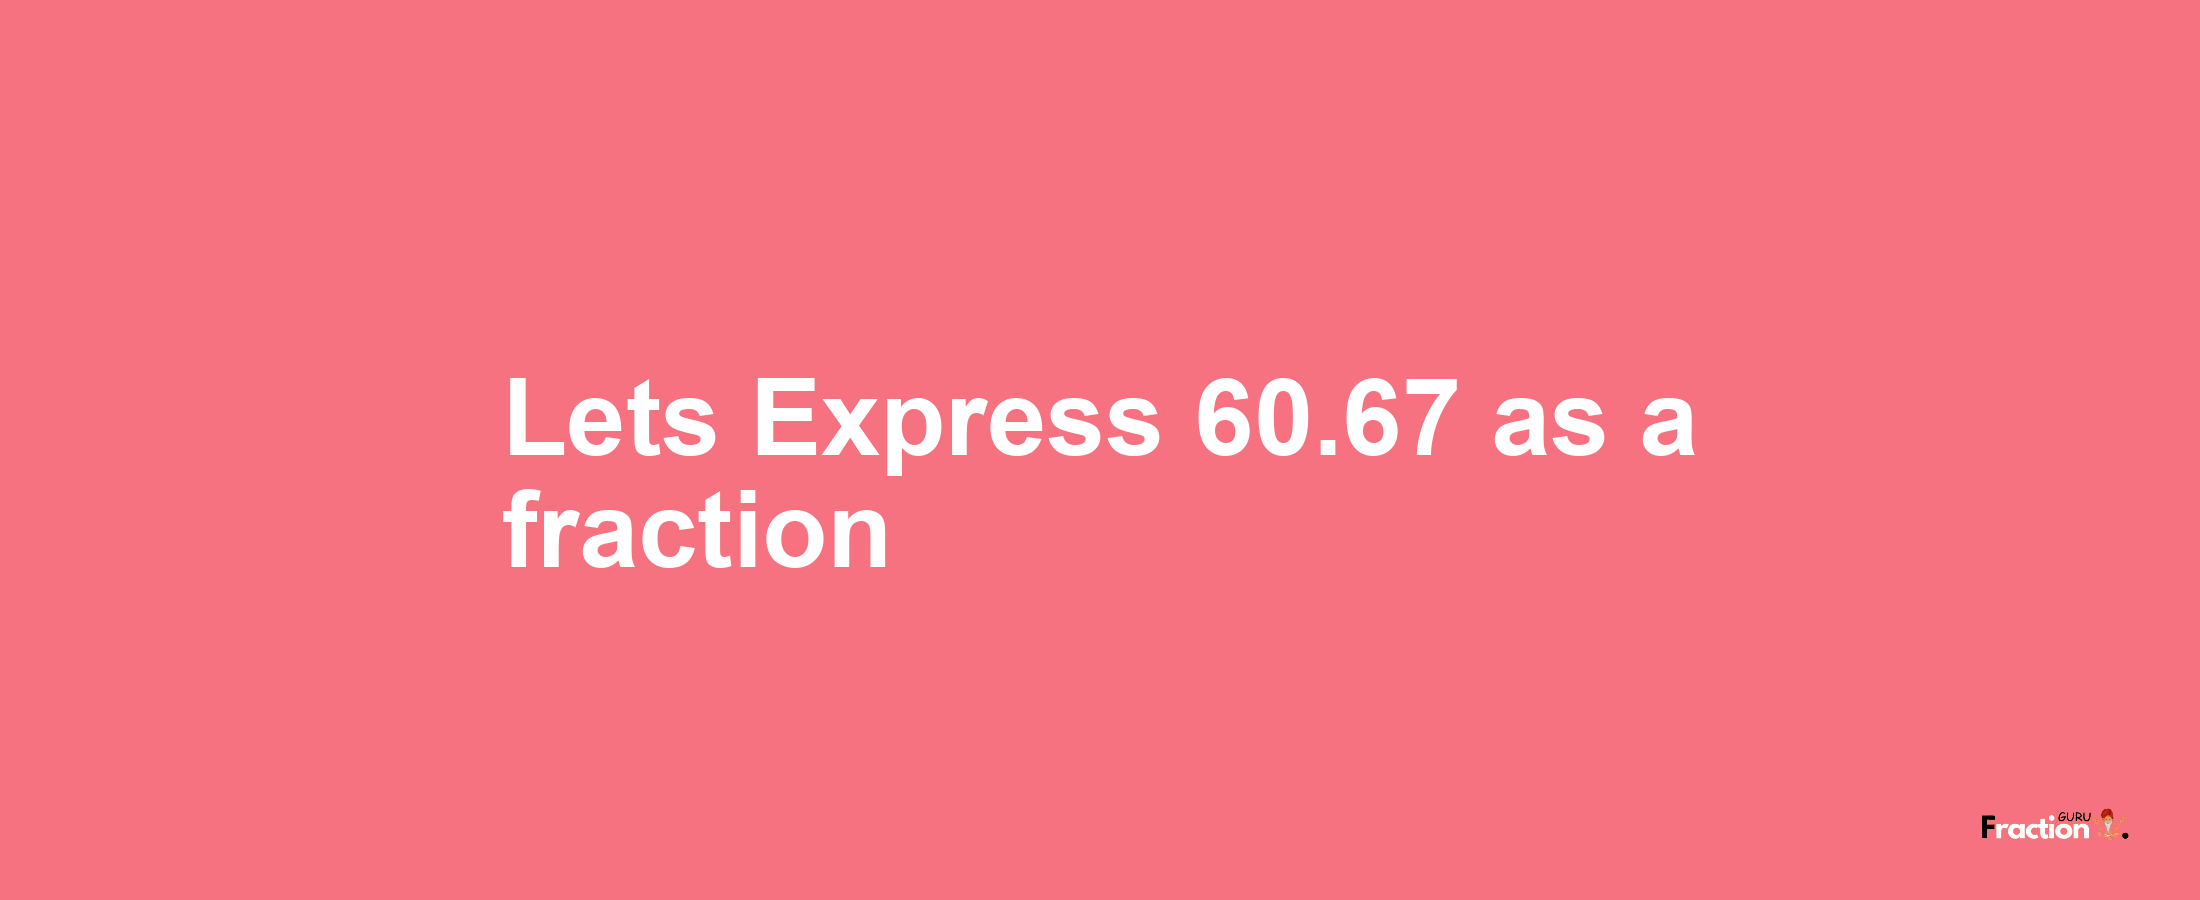 Lets Express 60.67 as afraction